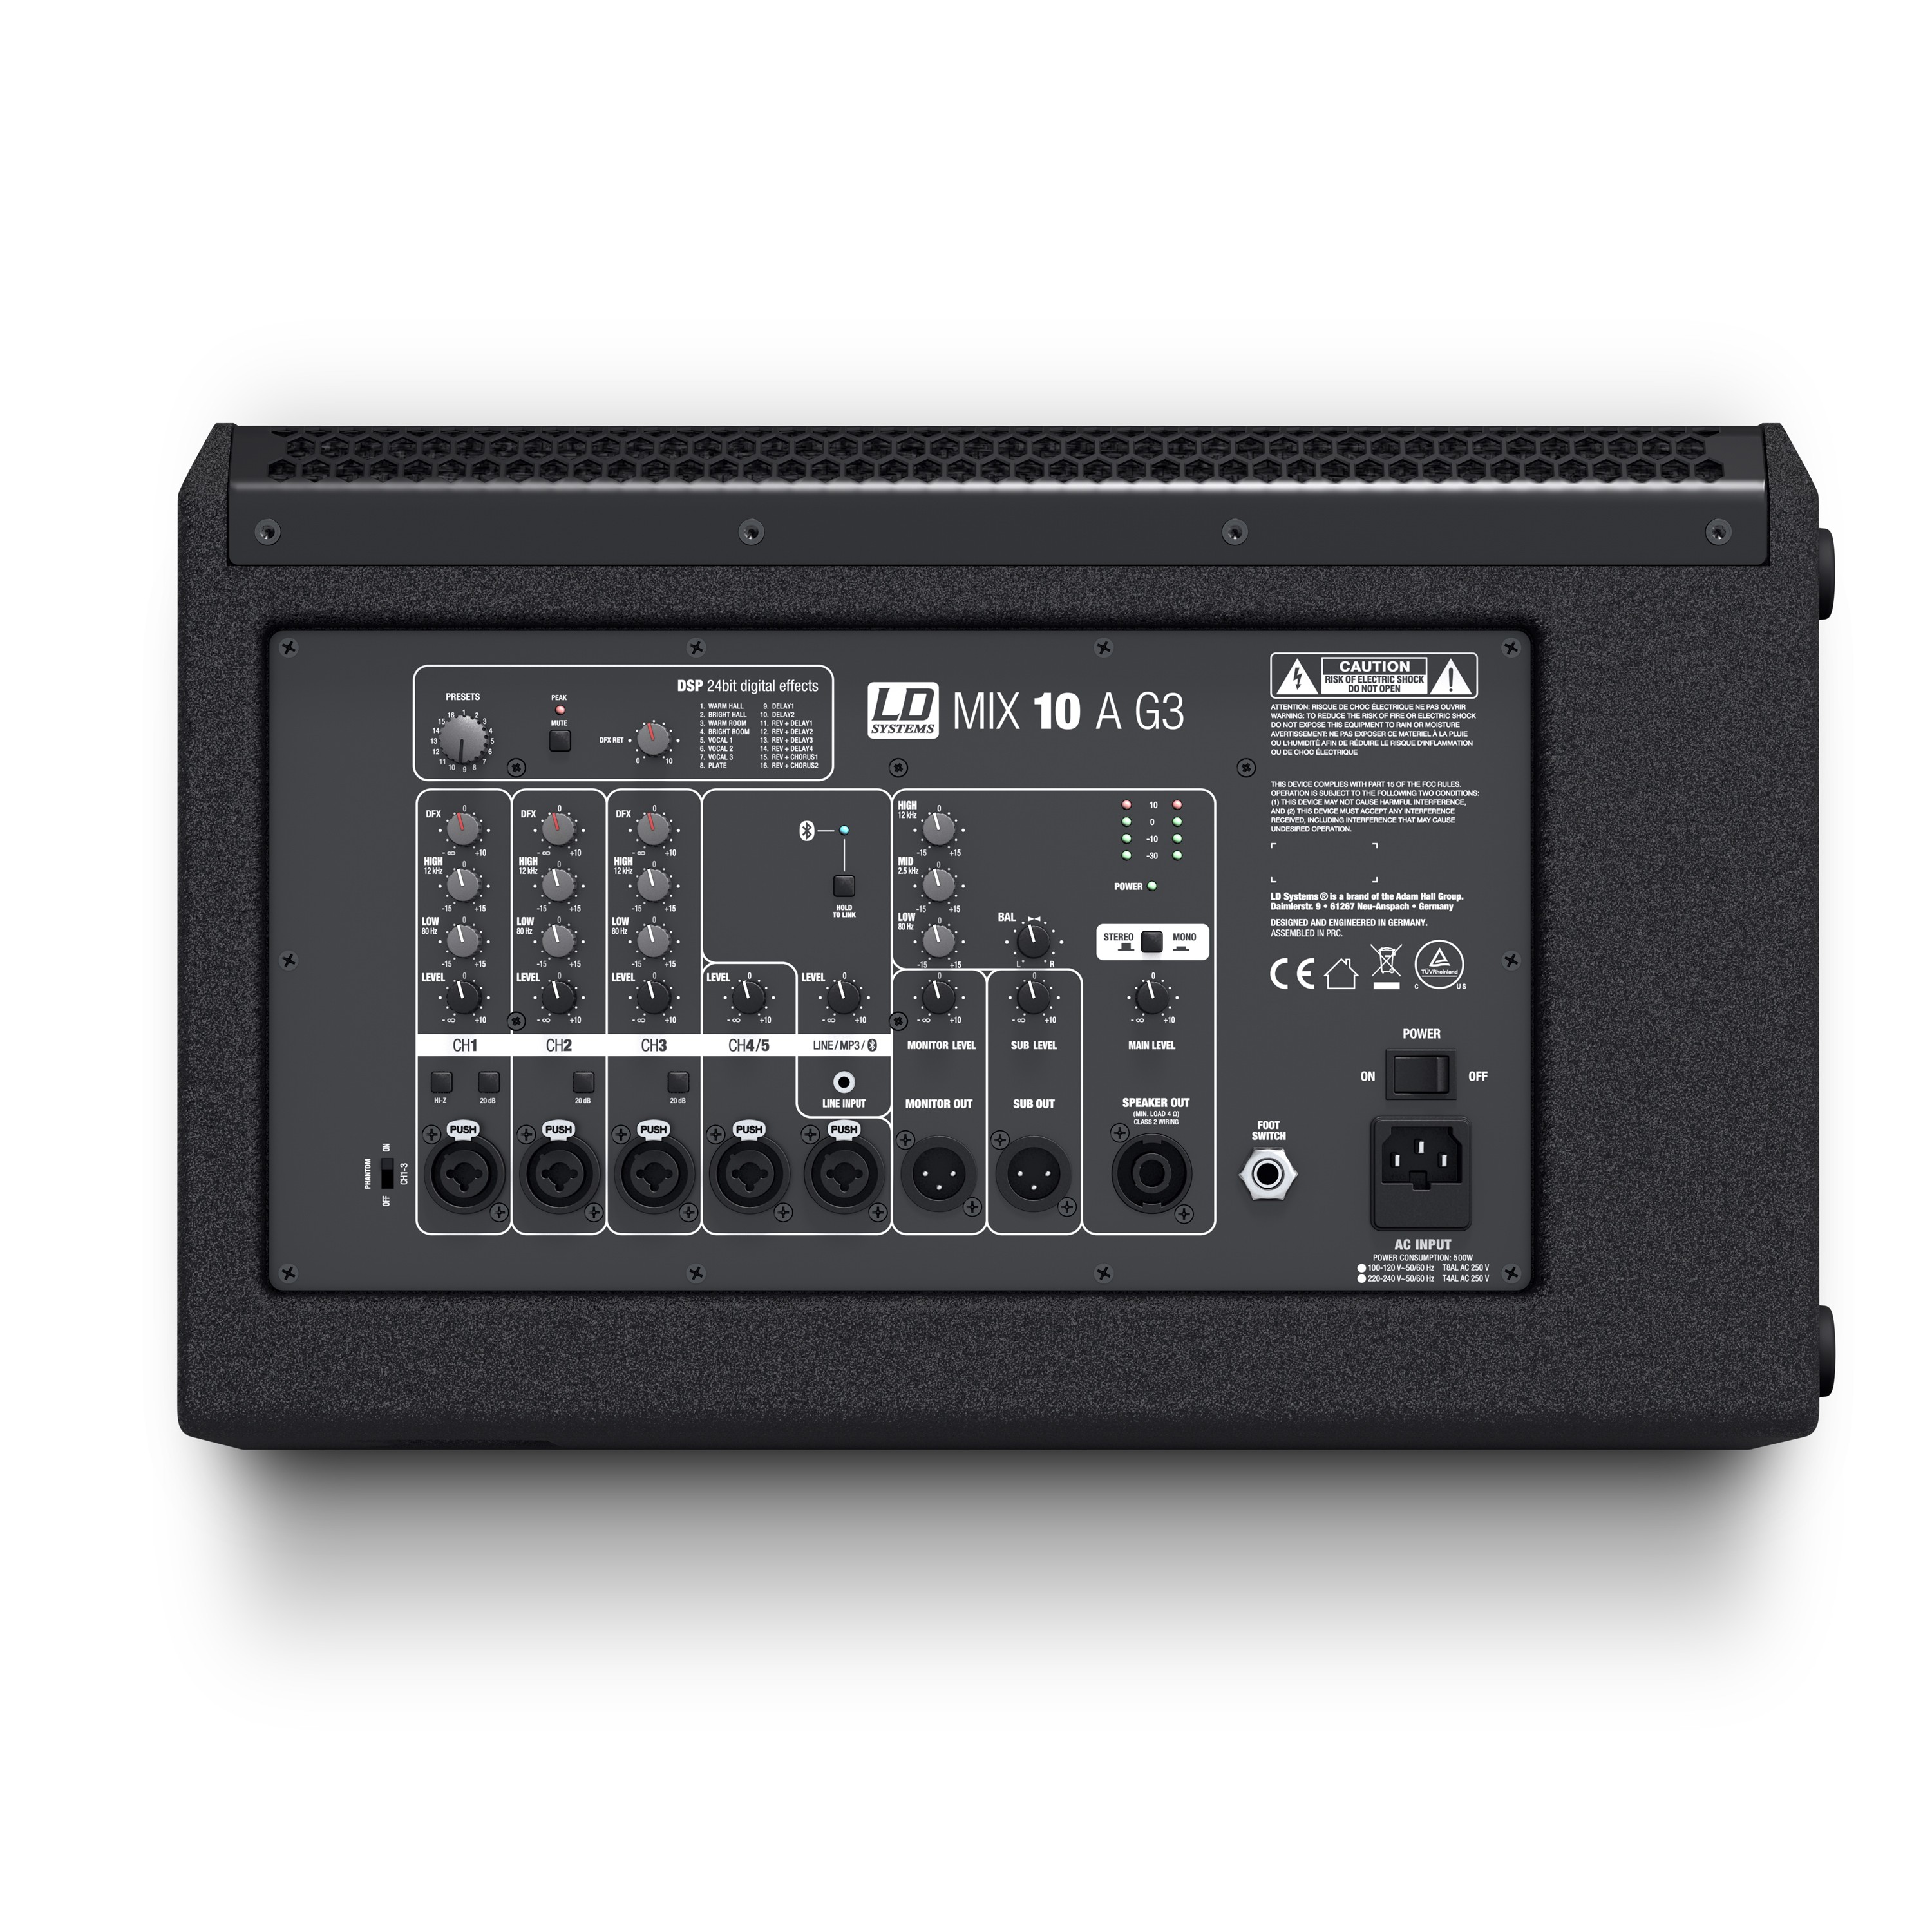 Ld Systems Mix 10 A G3 - Portable PA system - Variation 2